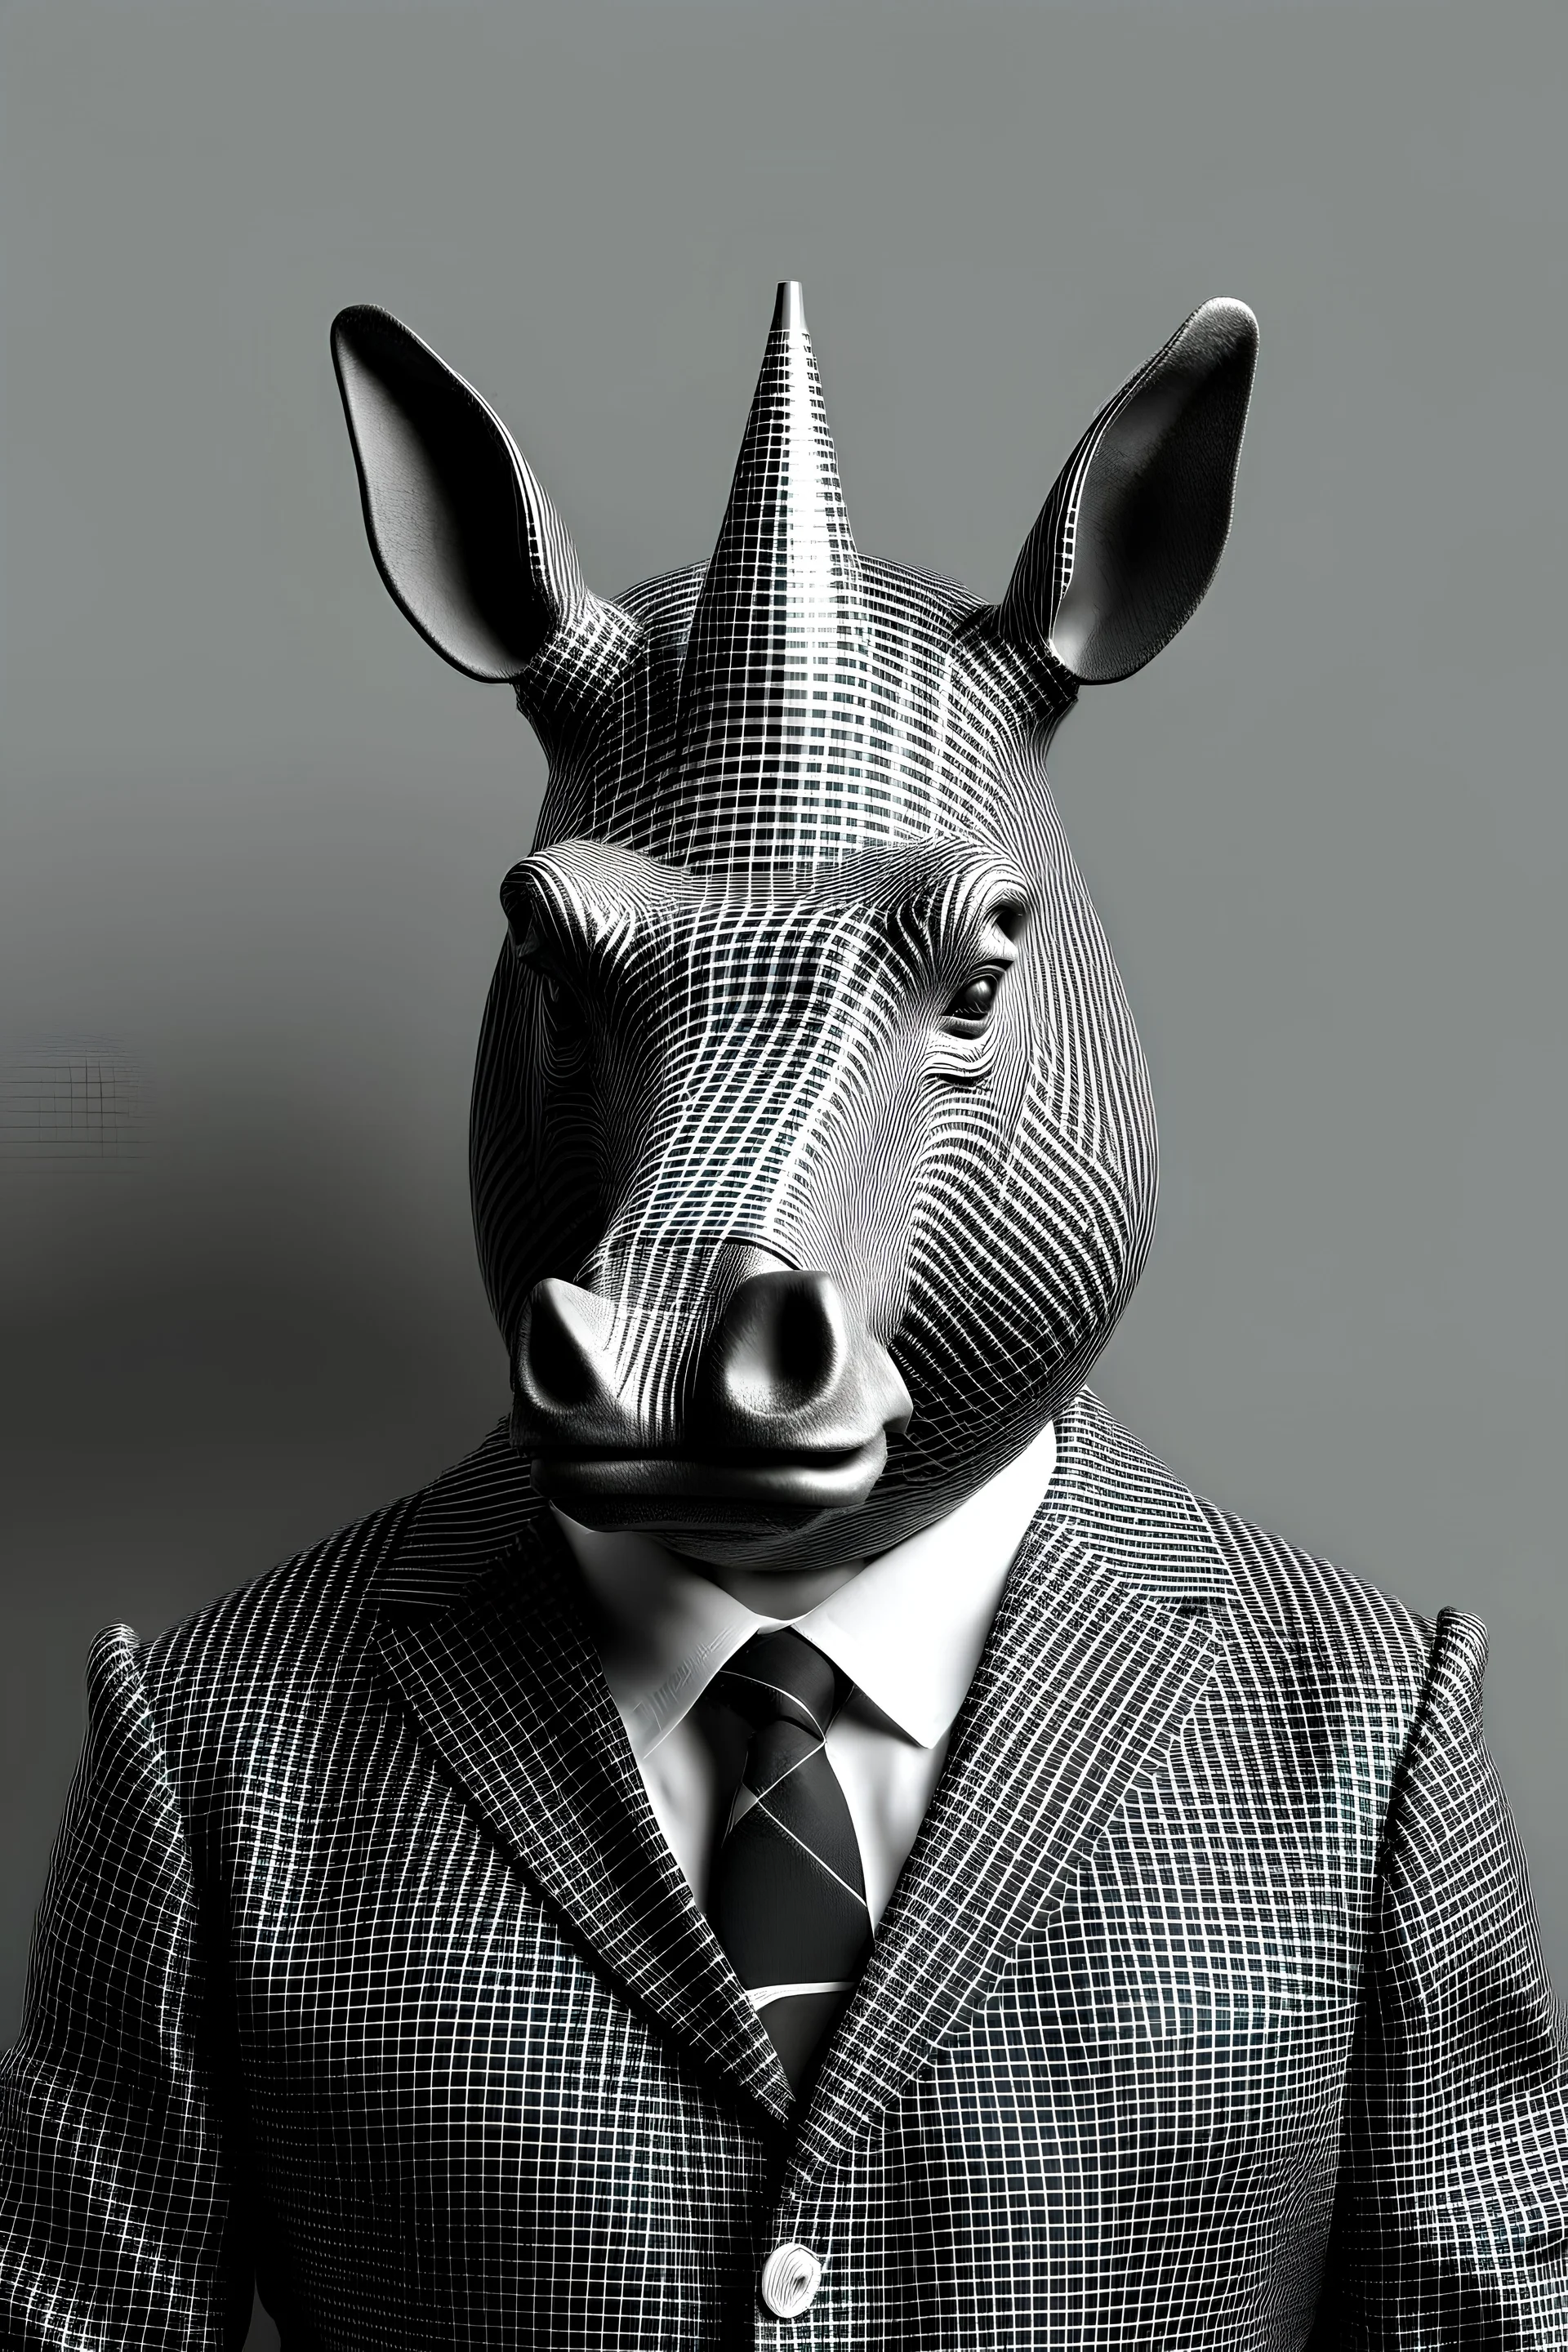 a headpiece merge with rhinoceros and grid pattern, office style